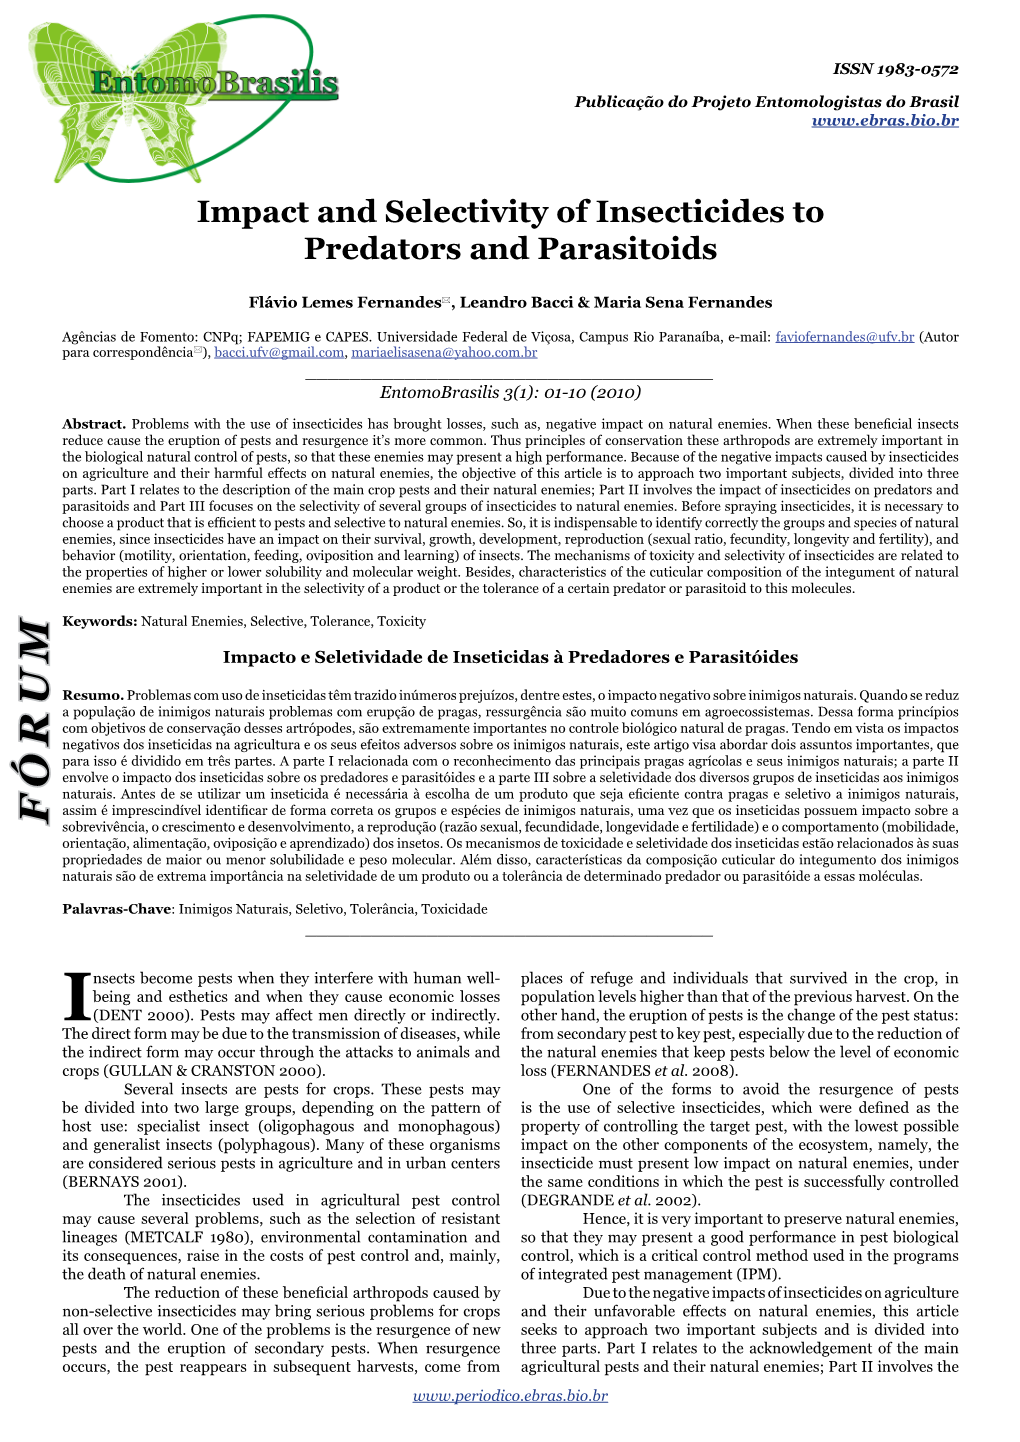 Impact and Selectivity of Insecticides to Predators and Parasitoids